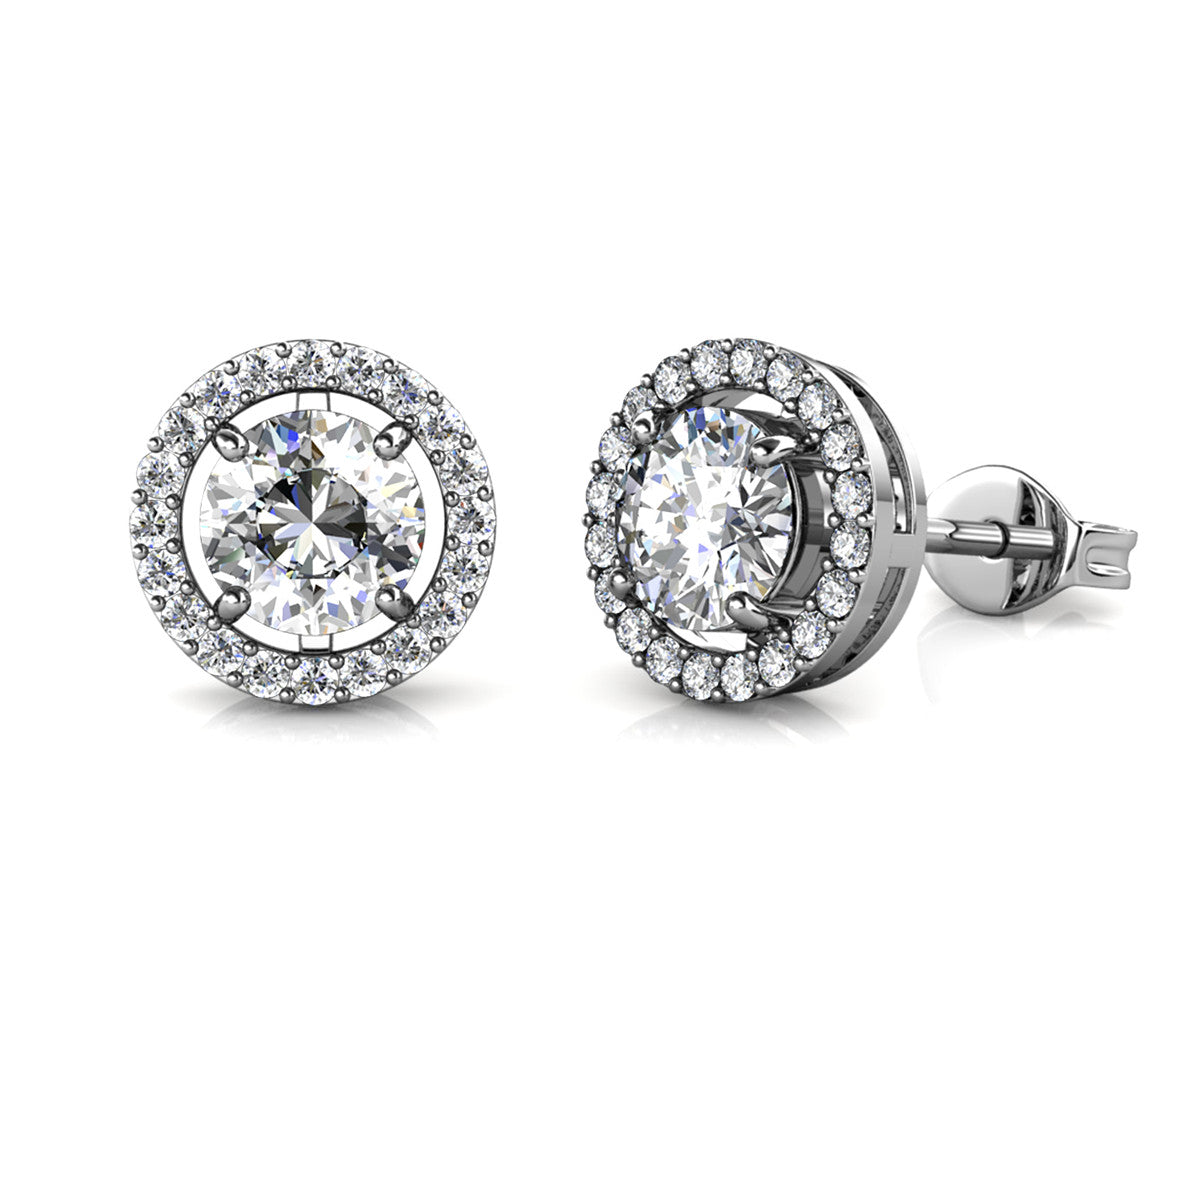 Moissanite by Cate & Chloe Kailani Sterling Silver Stud Earrings with Moissanite and 5A Cubic Zirconia Crystals